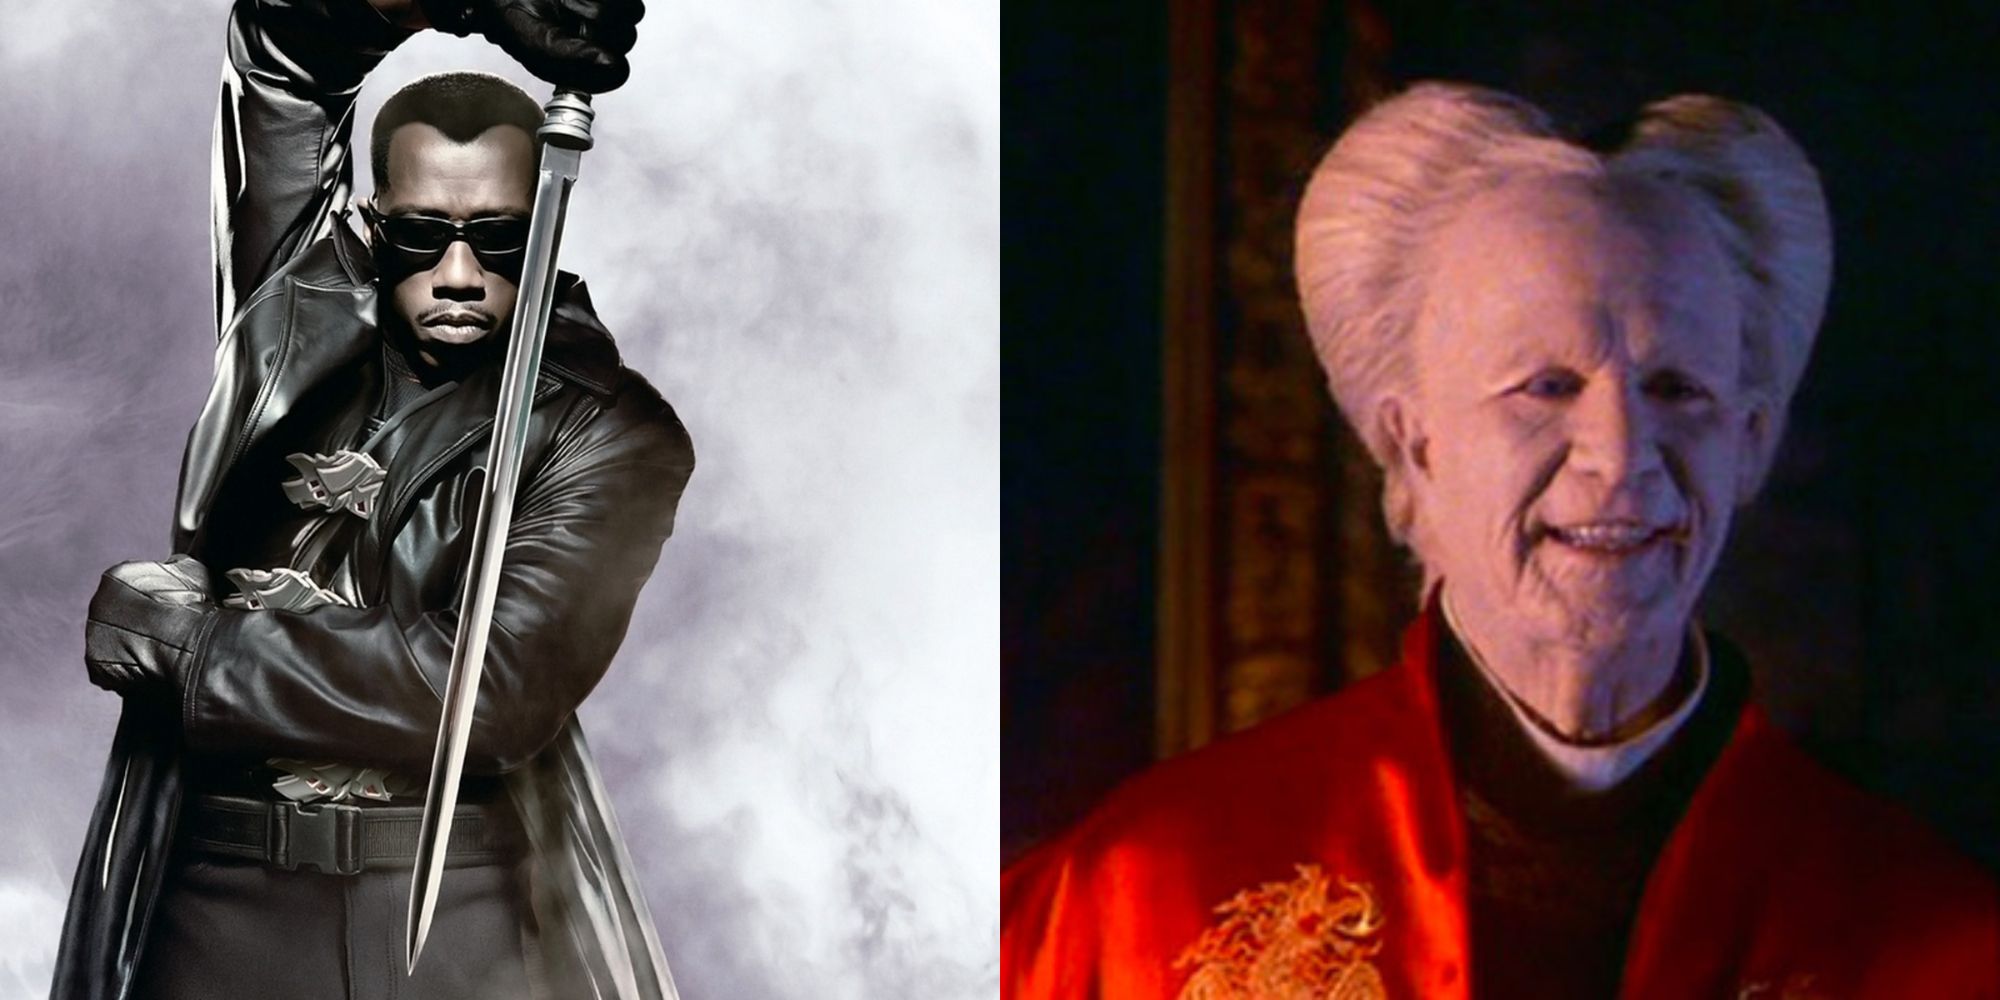 Split image showing Blade and Dracula.